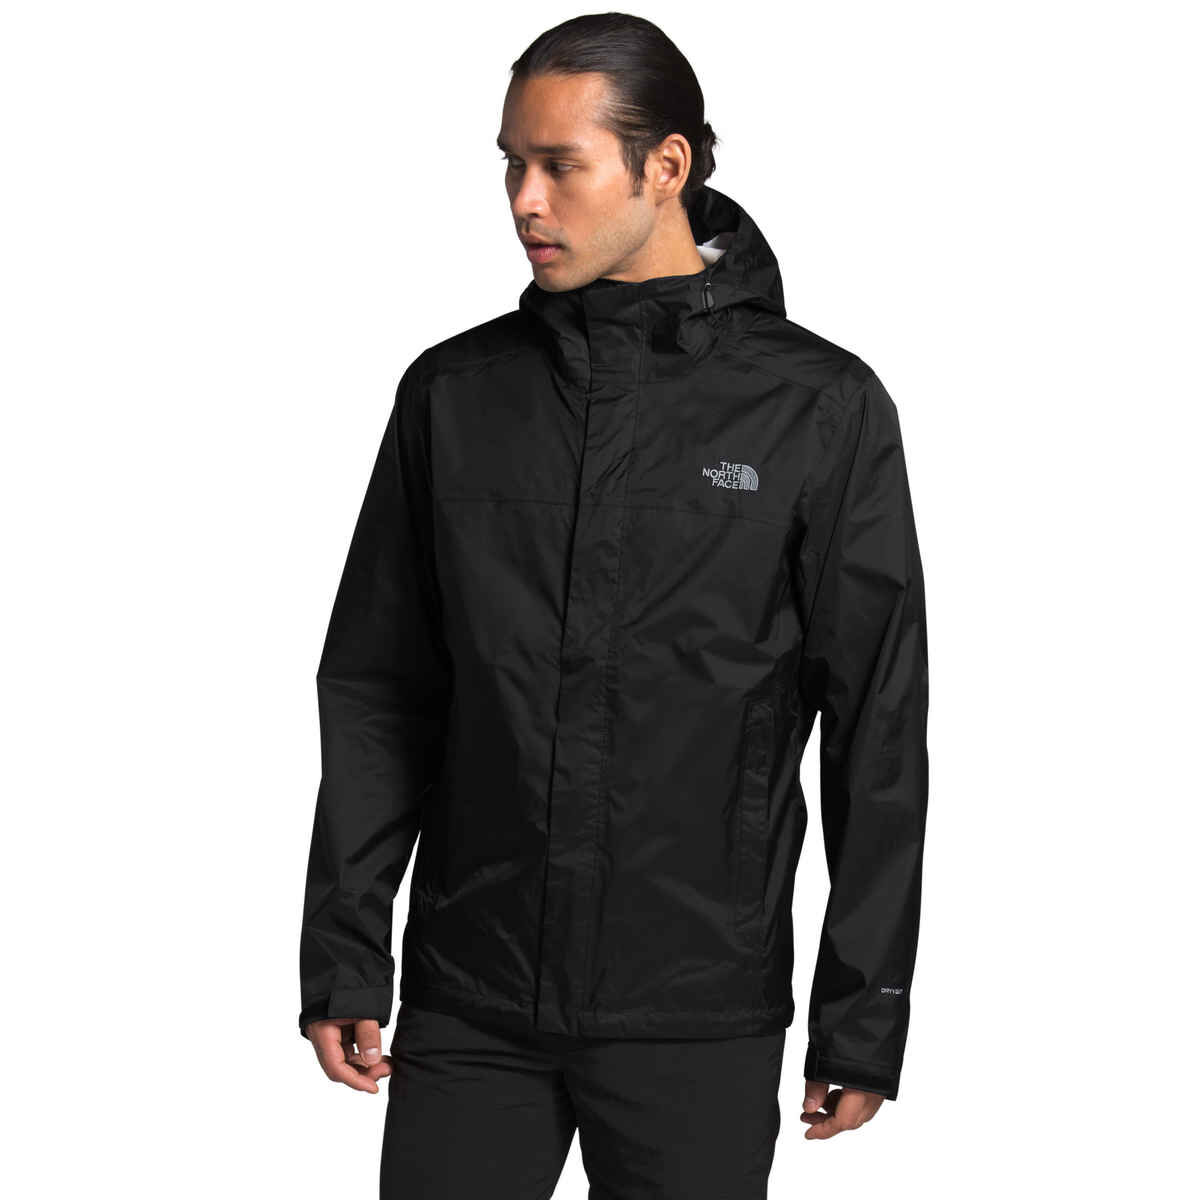 Buy The North Face Men's Venture 2 Jacket by The North Face